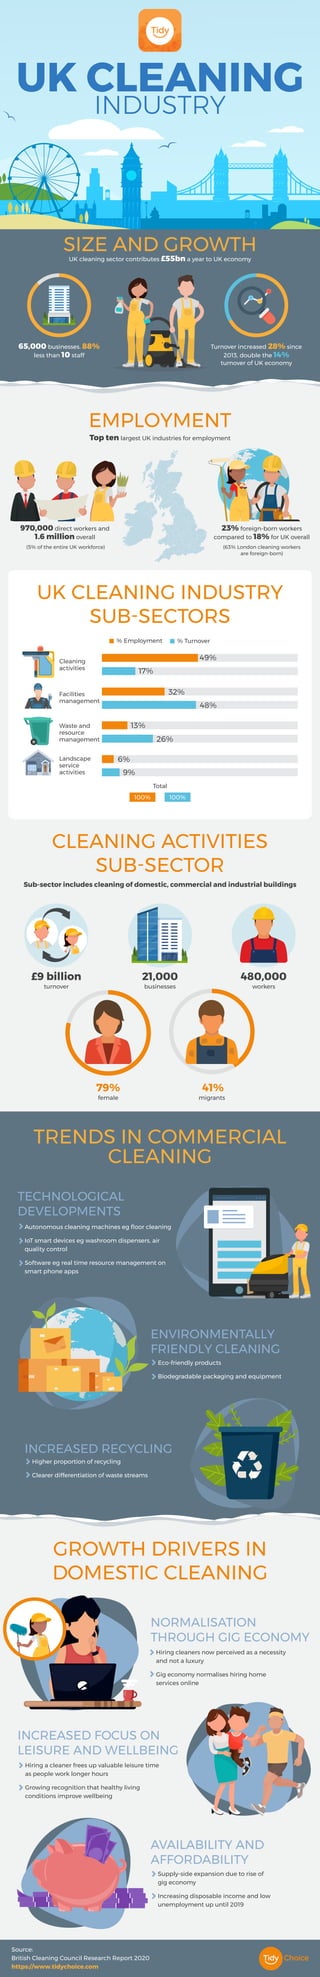 UK CLEANING
INDUSTRY
UK cleaning sector contributes £55bn a year to UK economy
970,000 direct workers and
1.6 million overall
(5% of the entire UK workforce)
Sub-sector includes cleaning of domestic, commercial and industrial buildings
£9 billion
turnover
21,000
businesses
480,000
workers
Top ten largest UK industries for employment
23% foreign-born workers
compared to 18% for UK overall
(63% London cleaning workers
are foreign-born)
65,000 businesses. 88%
less than 10 staff
Turnover increased 28% since
2013, double the 14%
turnover of UK economy
SIZE AND GROWTH
EMPLOYMENT
UK CLEANING INDUSTRY
SUB-SECTORS
CLEANING ACTIVITIES
SUB-SECTOR
GROWTH DRIVERS IN
DOMESTIC CLEANING
100% 100%
Total
79%
female
41%
migrants
TRENDS IN COMMERCIAL
CLEANING
TECHNOLOGICAL
DEVELOPMENTS
Autonomous cleaning machines eg ﬂoor cleaning
IoT smart devices eg washroom dispensers, air
quality control
Software eg real time resource management on
smart phone apps
ENVIRONMENTALLY
FRIENDLY CLEANING
Eco-friendly products
Biodegradable packaging and equipment
NORMALISATION
THROUGH GIG ECONOMY
Hiring cleaners now perceived as a necessity
and not a luxury
Gig economy normalises hiring home
services online
AVAILABILITY AND
AFFORDABILITY
Supply-side expansion due to rise of
gig economy
Increasing disposable income and low
unemployment up until 2019
INCREASED RECYCLING
Higher proportion of recycling
Clearer differentiation of waste streams
INCREASED FOCUS ON
LEISURE AND WELLBEING
Hiring a cleaner frees up valuable leisure time
as people work longer hours
Growing recognition that healthy living
conditions improve wellbeing
49%
17%
32%
48%
13%
26%
6%
9%
Cleaning
activities
Facilities
management
Waste and
resource
management
Landscape
service
activities
% Employment % Turnover
Source:
British Cleaning Council Research Report 2020
https://www.tidychoice.com
 